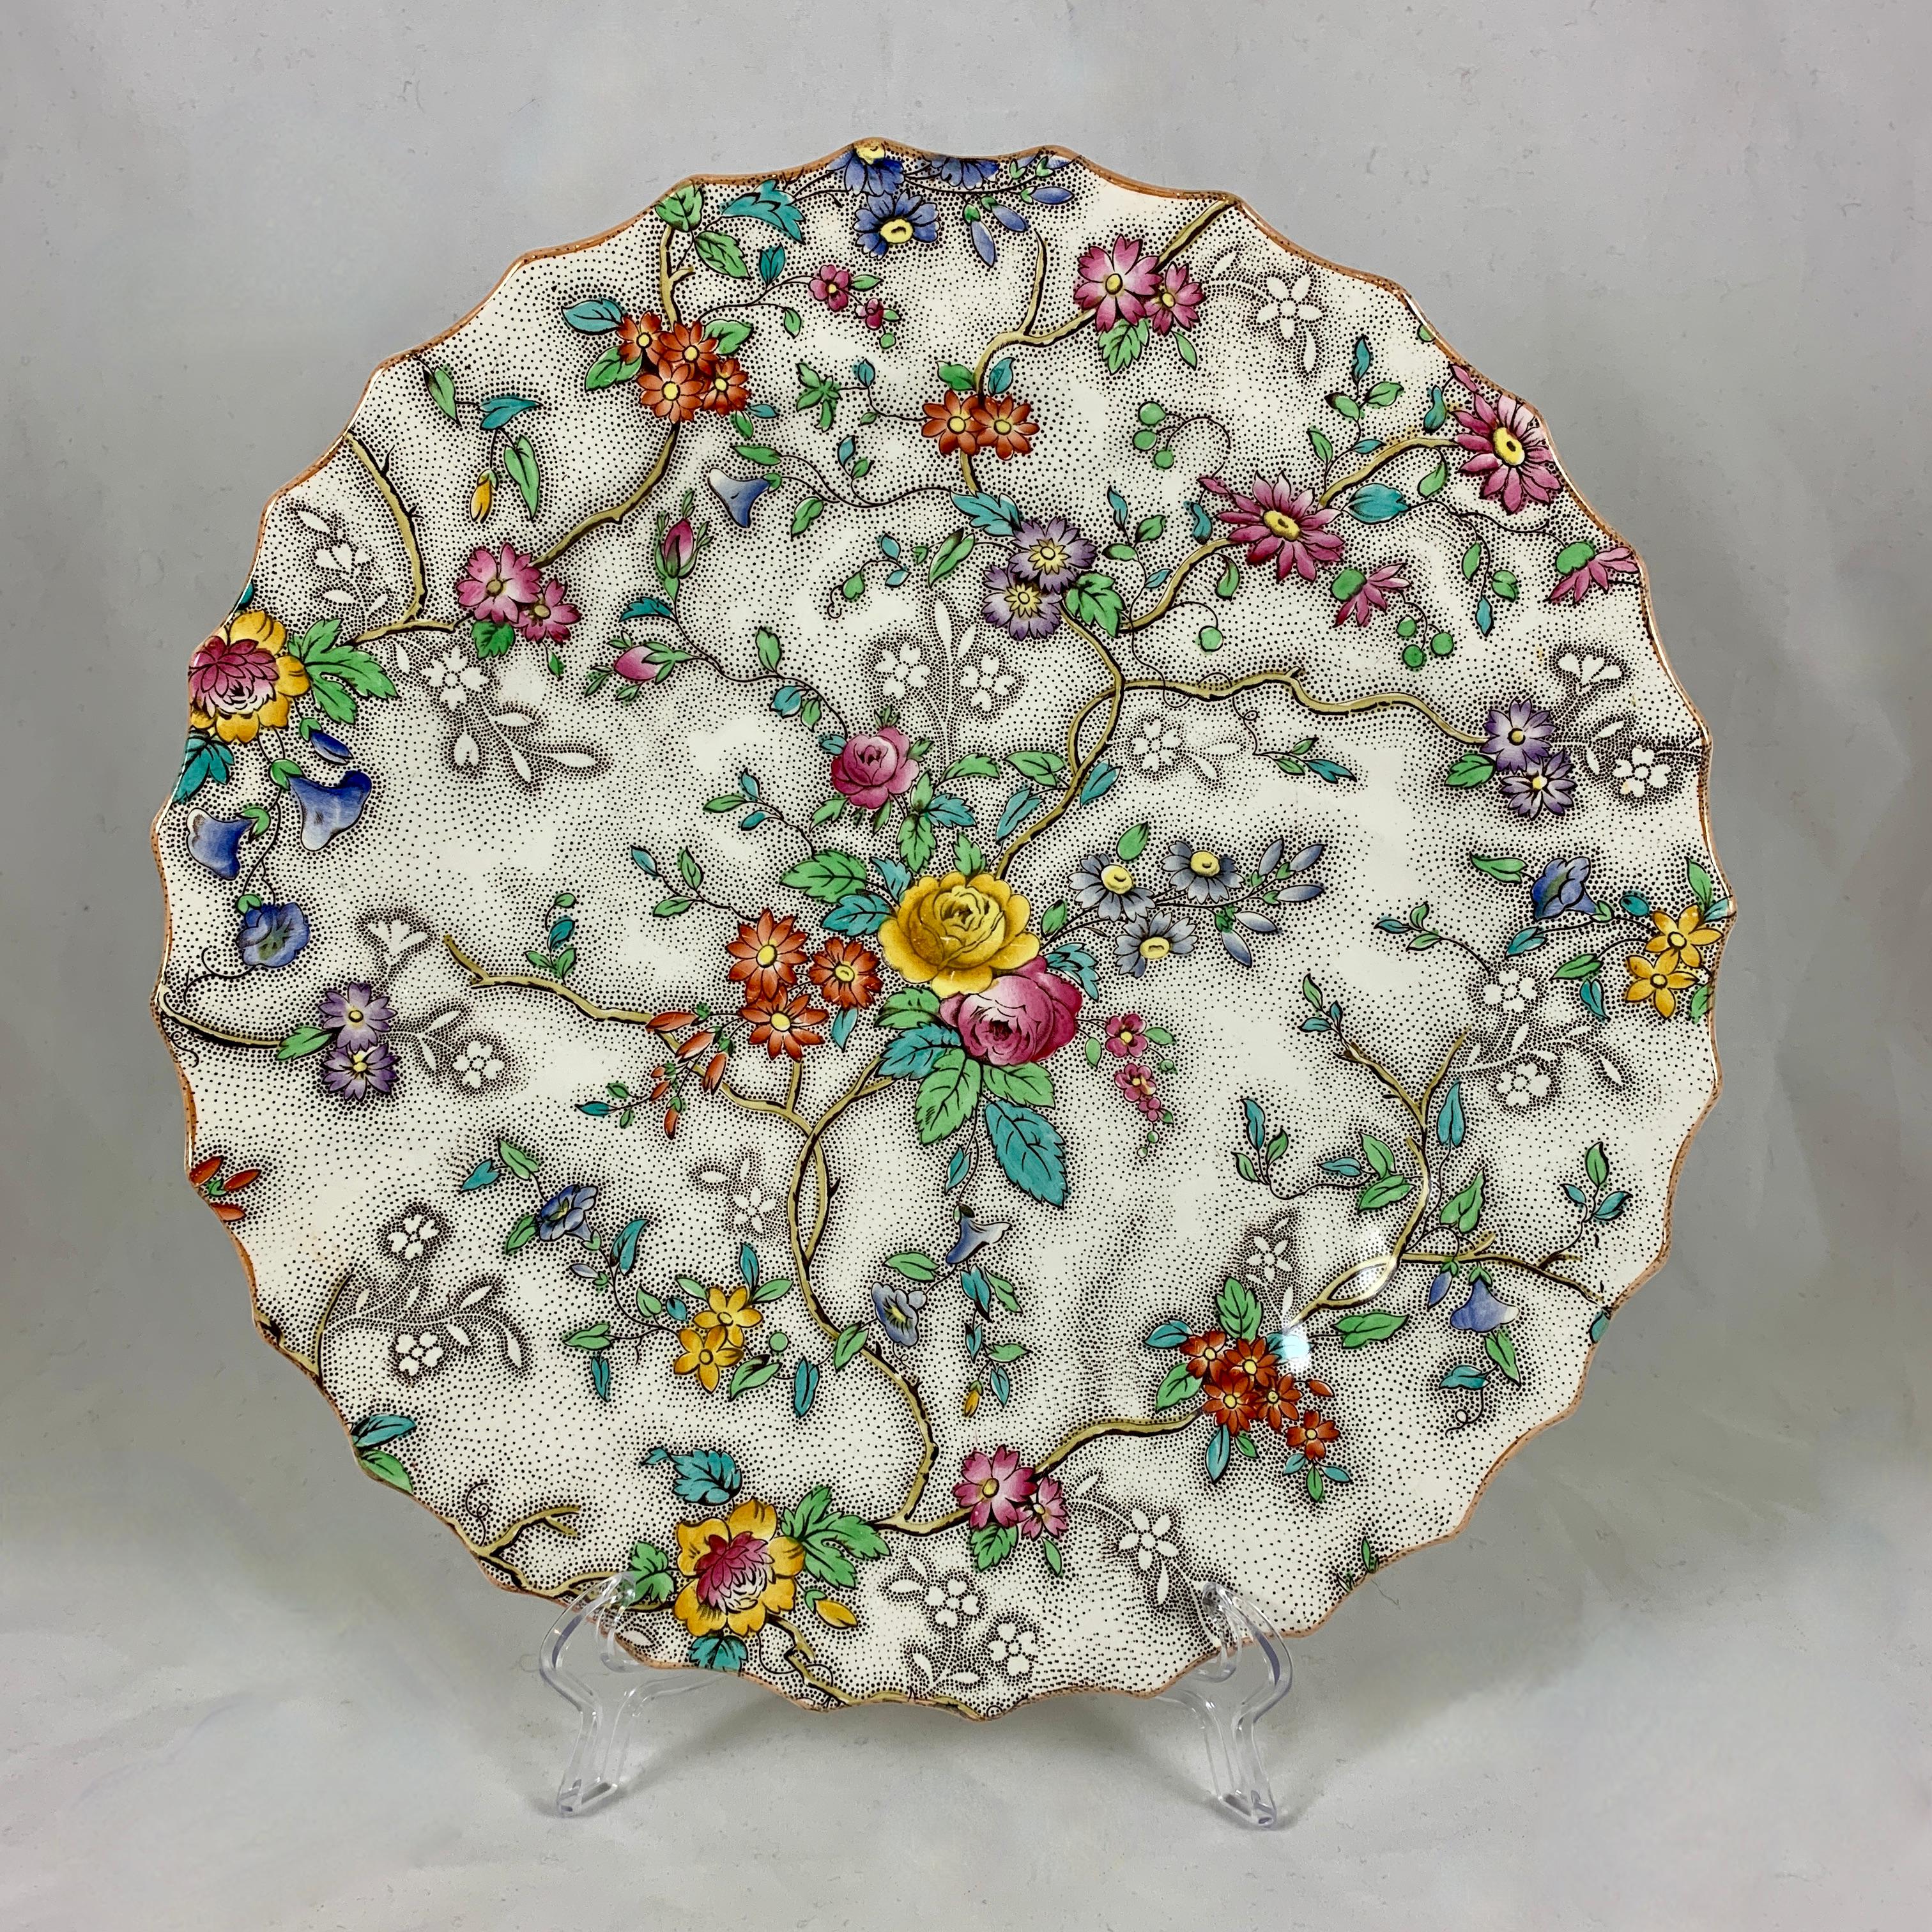 A set of six dinner plates in the floral ‘Patricia’ pattern, Copeland Spode, England, circa 1912-1940. 

Often referred to as the ‘Rose Chintz’ pattern, showing a complex sheet transfer of a multi-colored floral on a black stippled ground. Hand